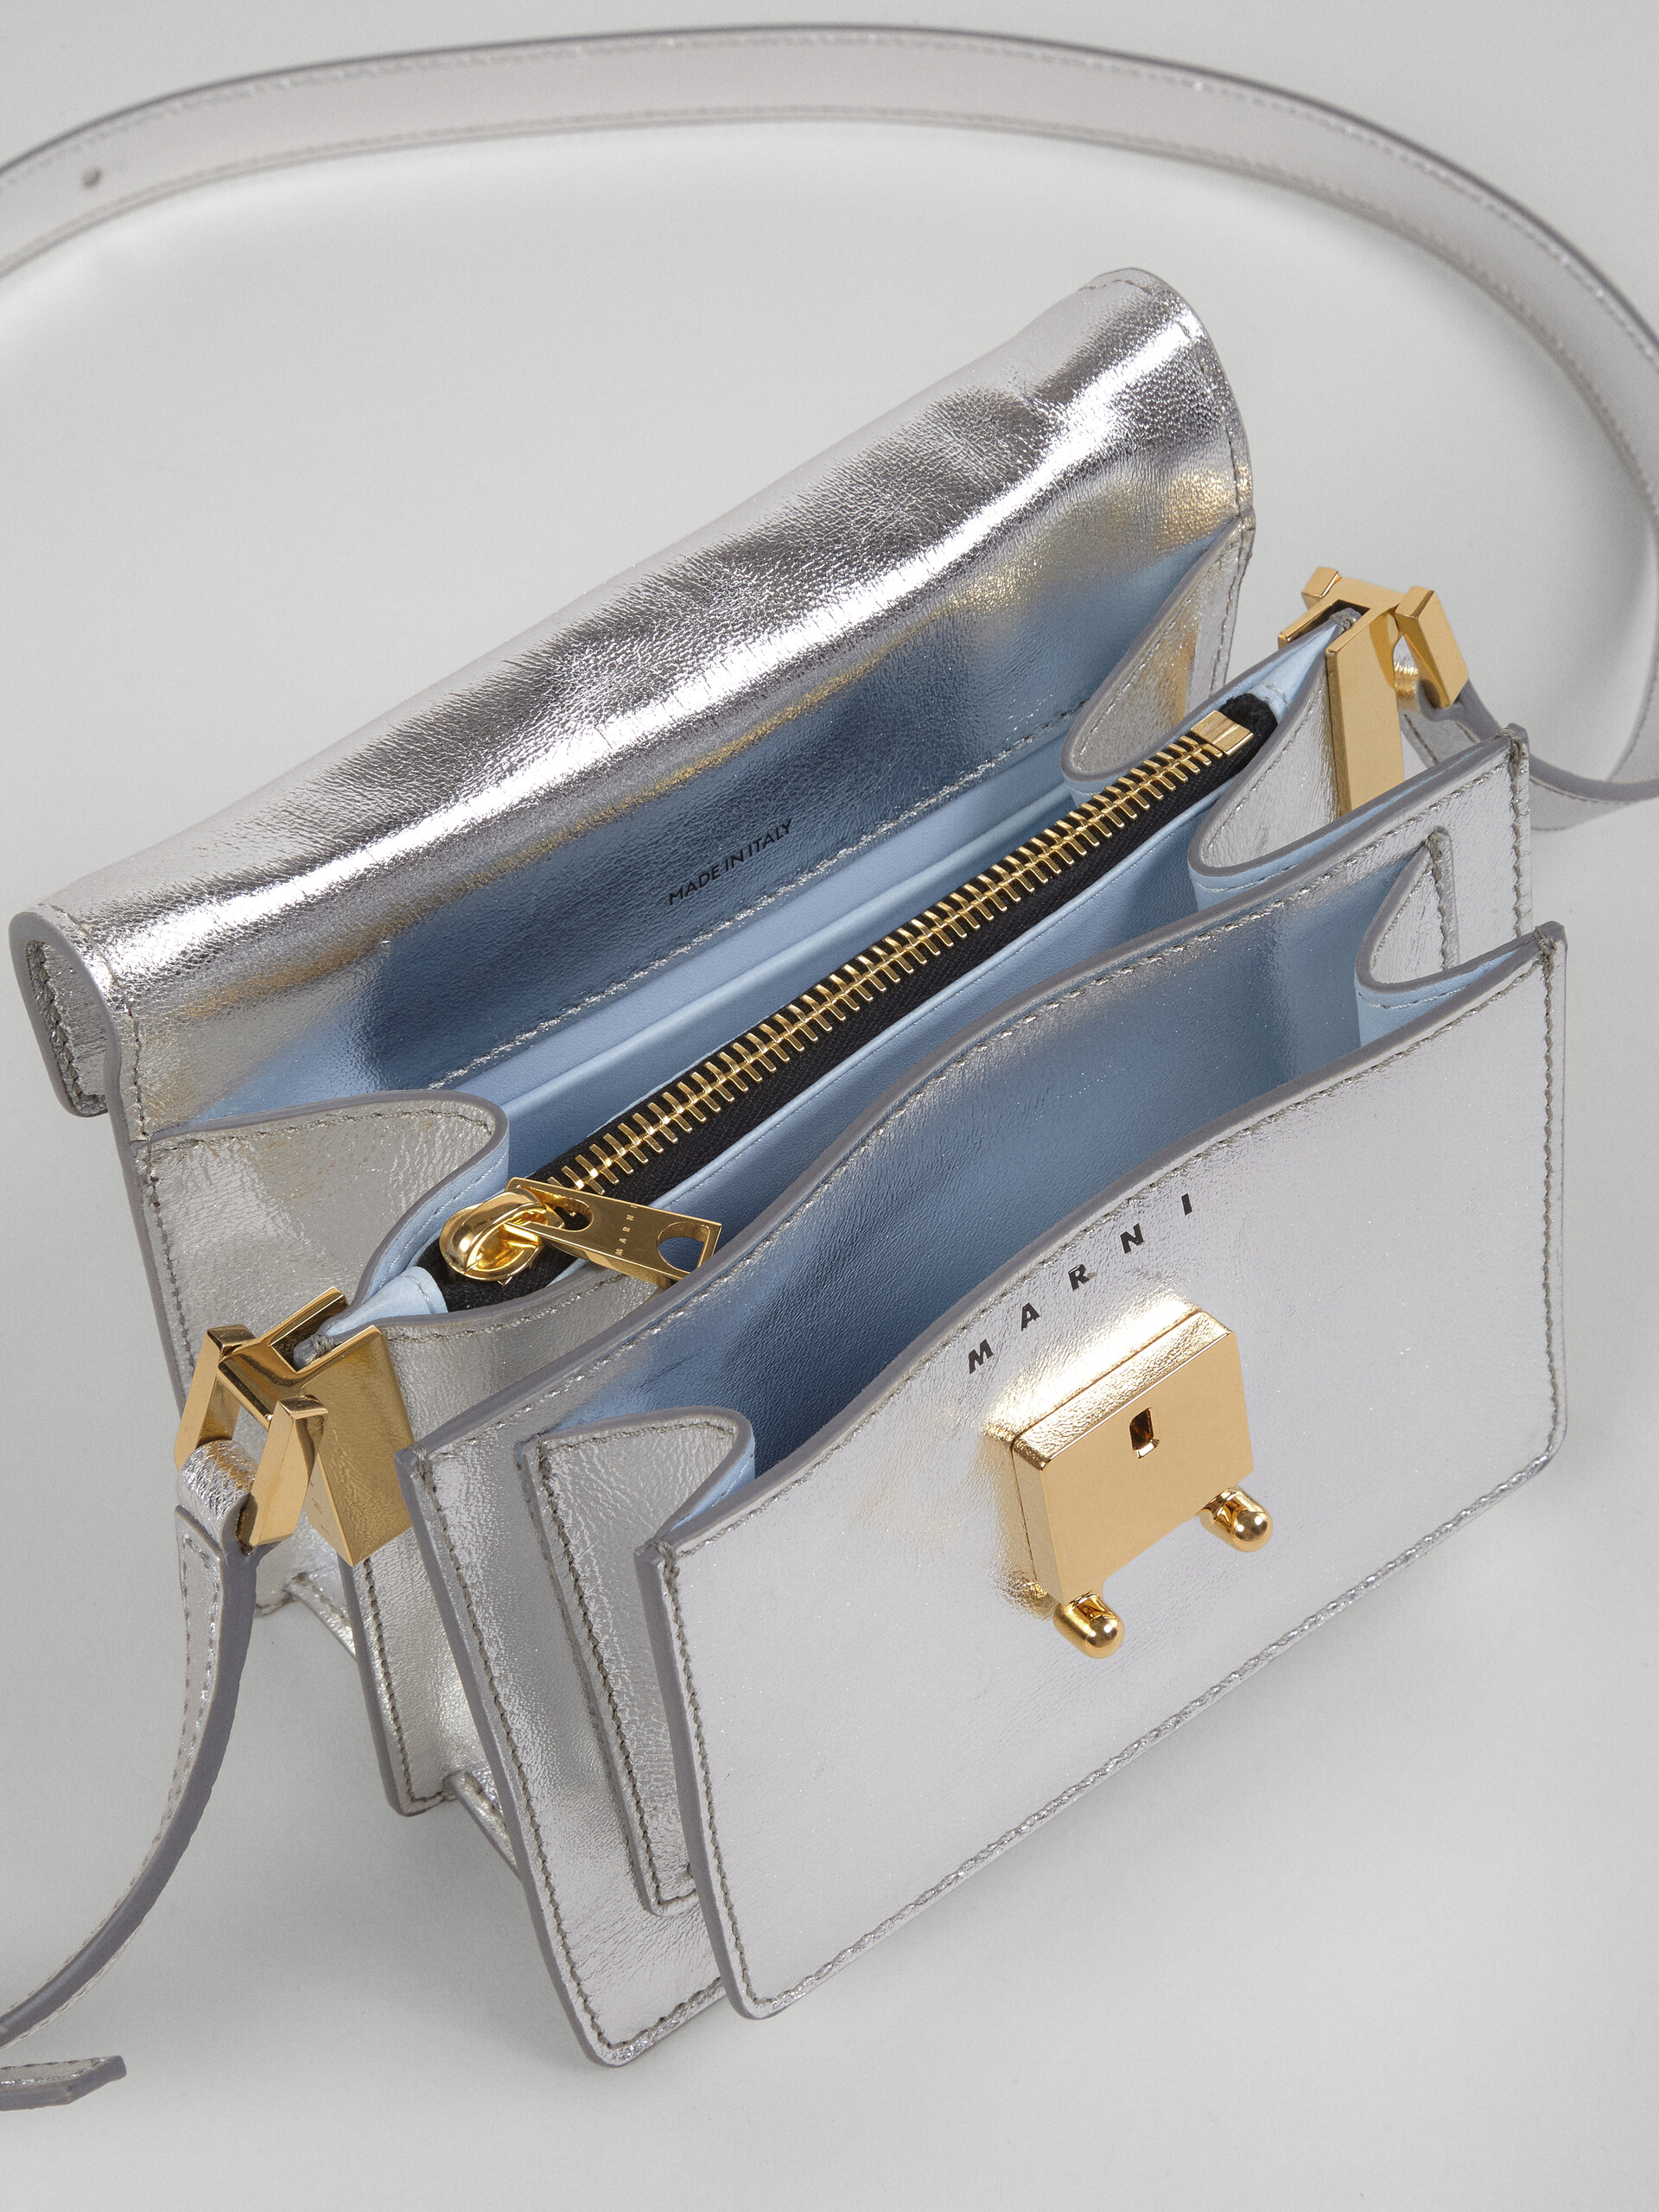 TRUNK SOFT mini bag in silver metallic leather - Shoulder Bags - Image 4